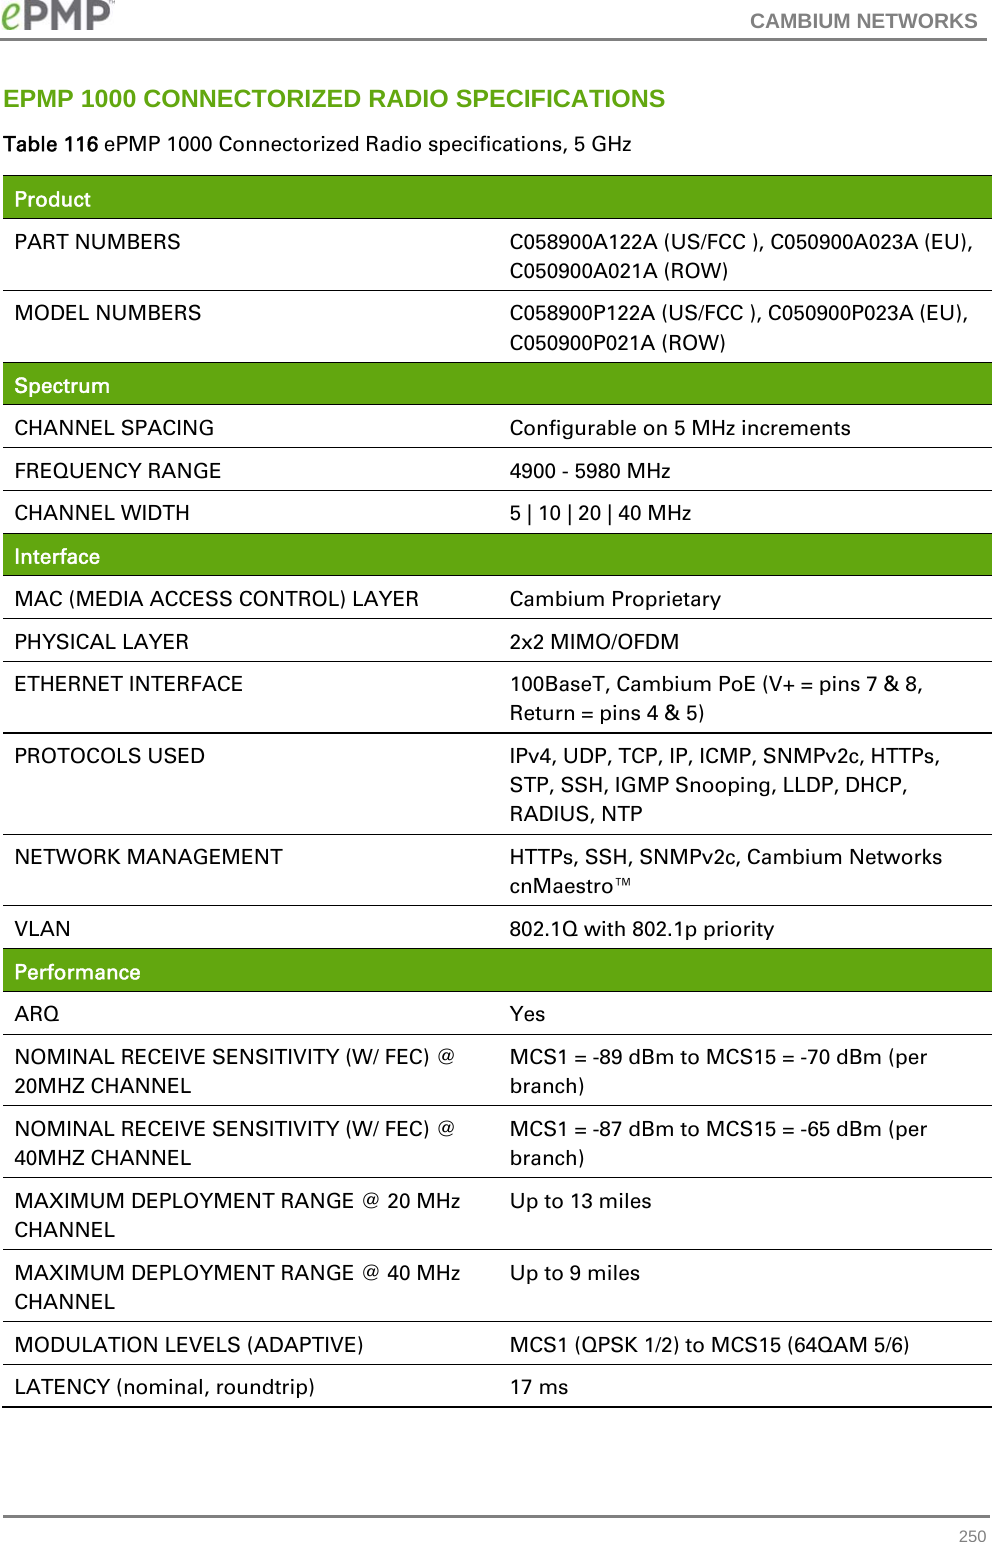 CAMBIUM NETWORKS   250EPMP 1000 CONNECTORIZED RADIO SPECIFICATIONS Table 116 ePMP 1000 Connectorized Radio specifications, 5 GHz Product  PART NUMBERS  C058900A122A (US/FCC ), C050900A023A (EU), C050900A021A (ROW) MODEL NUMBERS  C058900P122A (US/FCC ), C050900P023A (EU), C050900P021A (ROW) Spectrum  CHANNEL SPACING  Configurable on 5 MHz increments FREQUENCY RANGE  4900 - 5980 MHz CHANNEL WIDTH  5 | 10 | 20 | 40 MHz   Interface  MAC (MEDIA ACCESS CONTROL) LAYER  Cambium Proprietary PHYSICAL LAYER  2x2 MIMO/OFDM ETHERNET INTERFACE  100BaseT, Cambium PoE (V+ = pins 7 &amp; 8, Return = pins 4 &amp; 5) PROTOCOLS USED  IPv4, UDP, TCP, IP, ICMP, SNMPv2c, HTTPs, STP, SSH, IGMP Snooping, LLDP, DHCP, RADIUS, NTP  NETWORK MANAGEMENT  HTTPs, SSH, SNMPv2c, Cambium Networks cnMaestro™ VLAN  802.1Q with 802.1p priority Performance  ARQ Yes NOMINAL RECEIVE SENSITIVITY (W/ FEC) @ 20MHZ CHANNEL MCS1 = -89 dBm to MCS15 = -70 dBm (per branch) NOMINAL RECEIVE SENSITIVITY (W/ FEC) @ 40MHZ CHANNEL MCS1 = -87 dBm to MCS15 = -65 dBm (per branch) MAXIMUM DEPLOYMENT RANGE @ 20 MHz CHANNEL Up to 13 miles MAXIMUM DEPLOYMENT RANGE @ 40 MHz CHANNEL Up to 9 miles MODULATION LEVELS (ADAPTIVE)  MCS1 (QPSK 1/2) to MCS15 (64QAM 5/6) LATENCY (nominal, roundtrip)  17 ms 